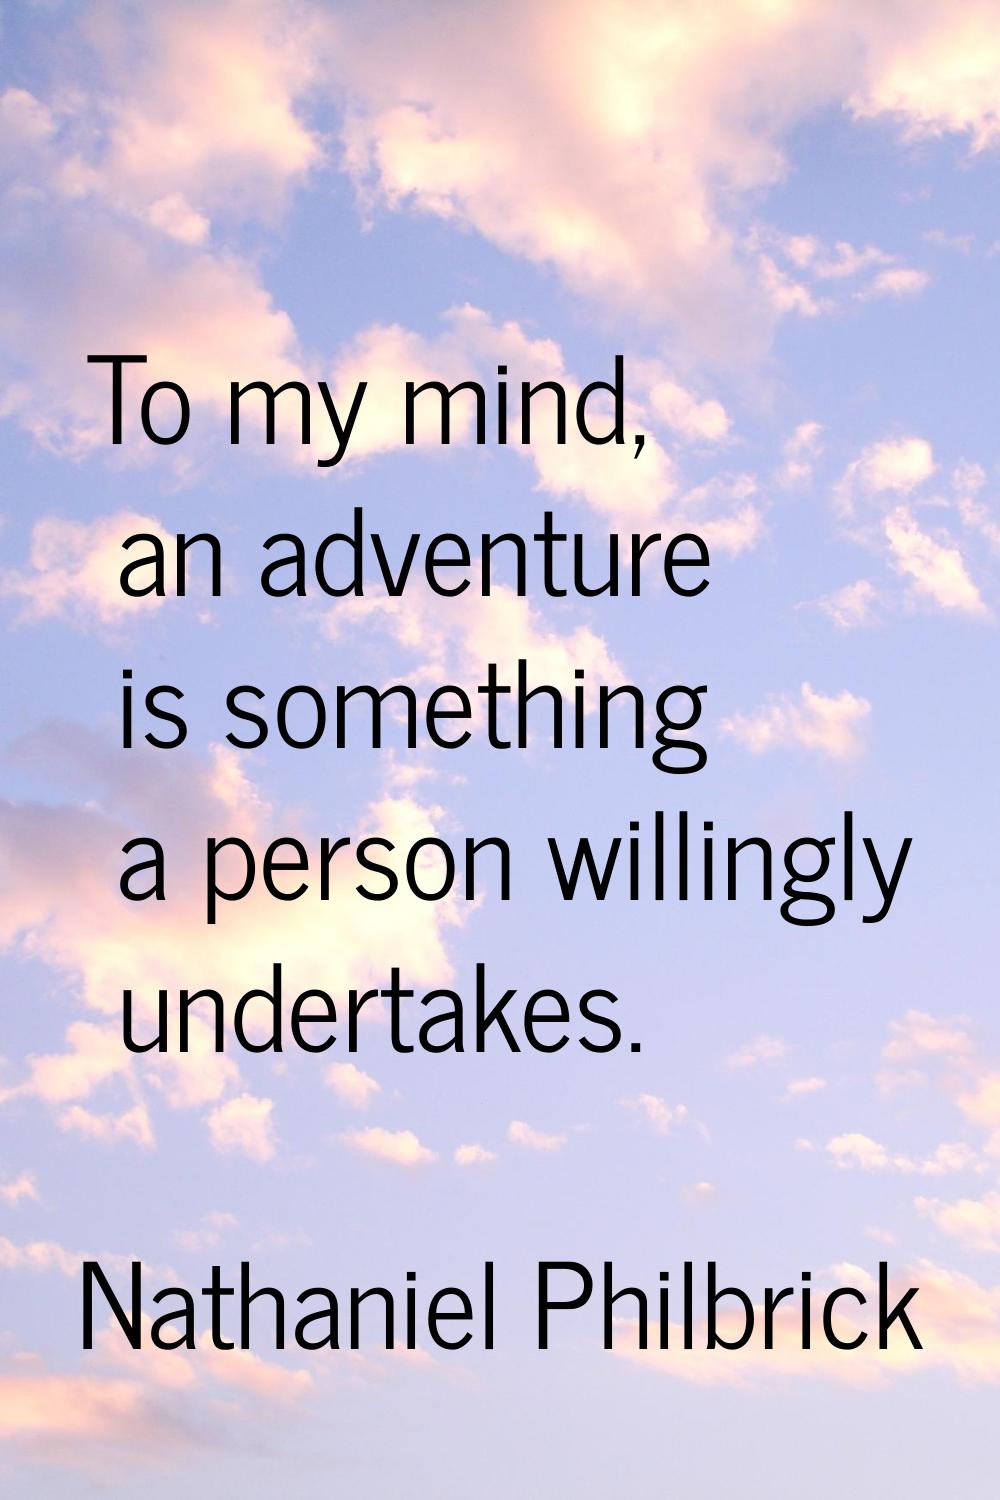 To my mind, an adventure is something a person willingly undertakes.